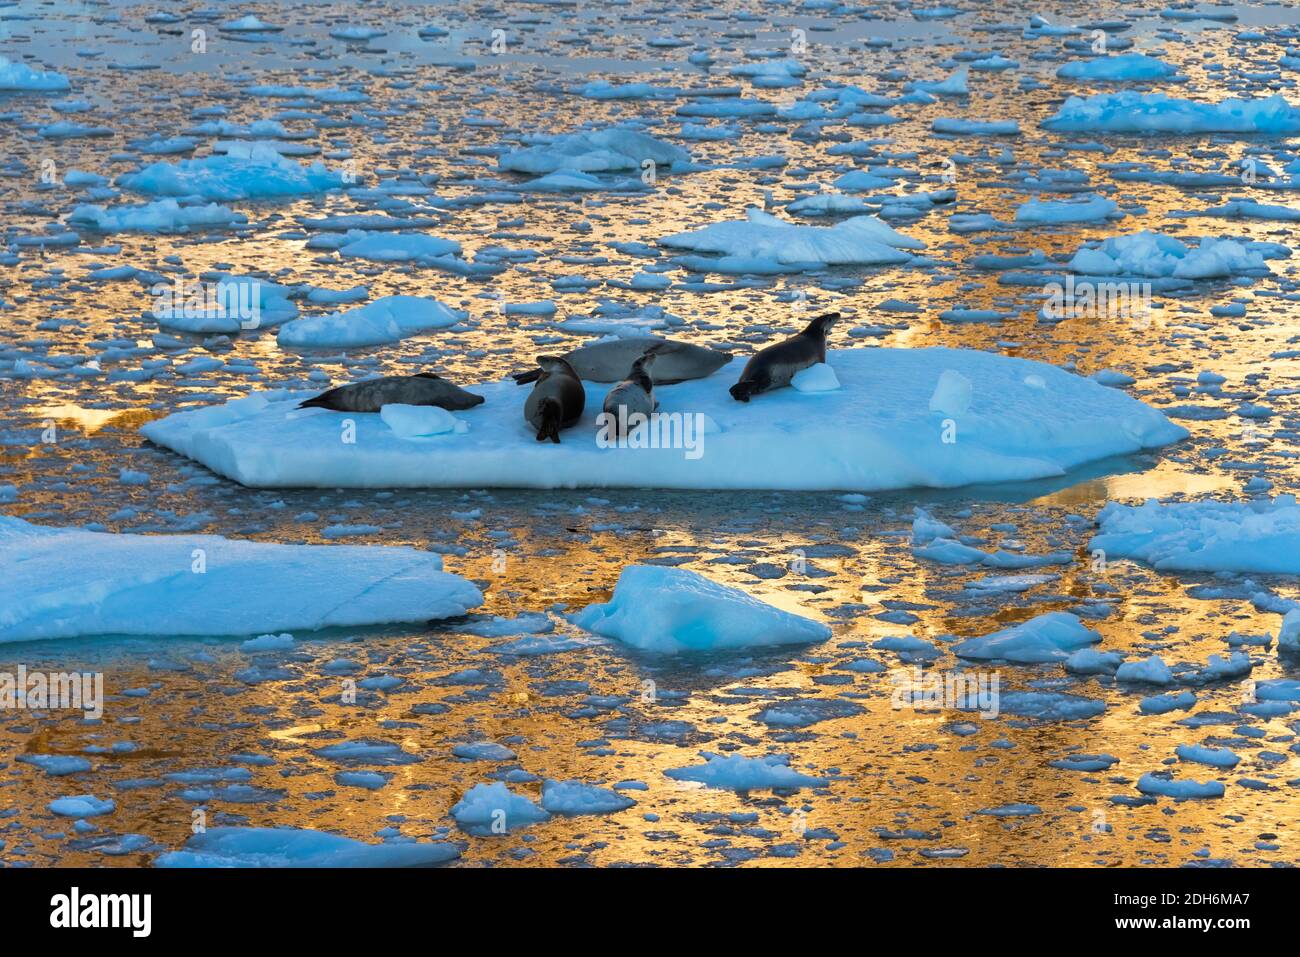 Crabeater seal on floating ice in South Atlantic Ocean, Antarctica Stock Photo